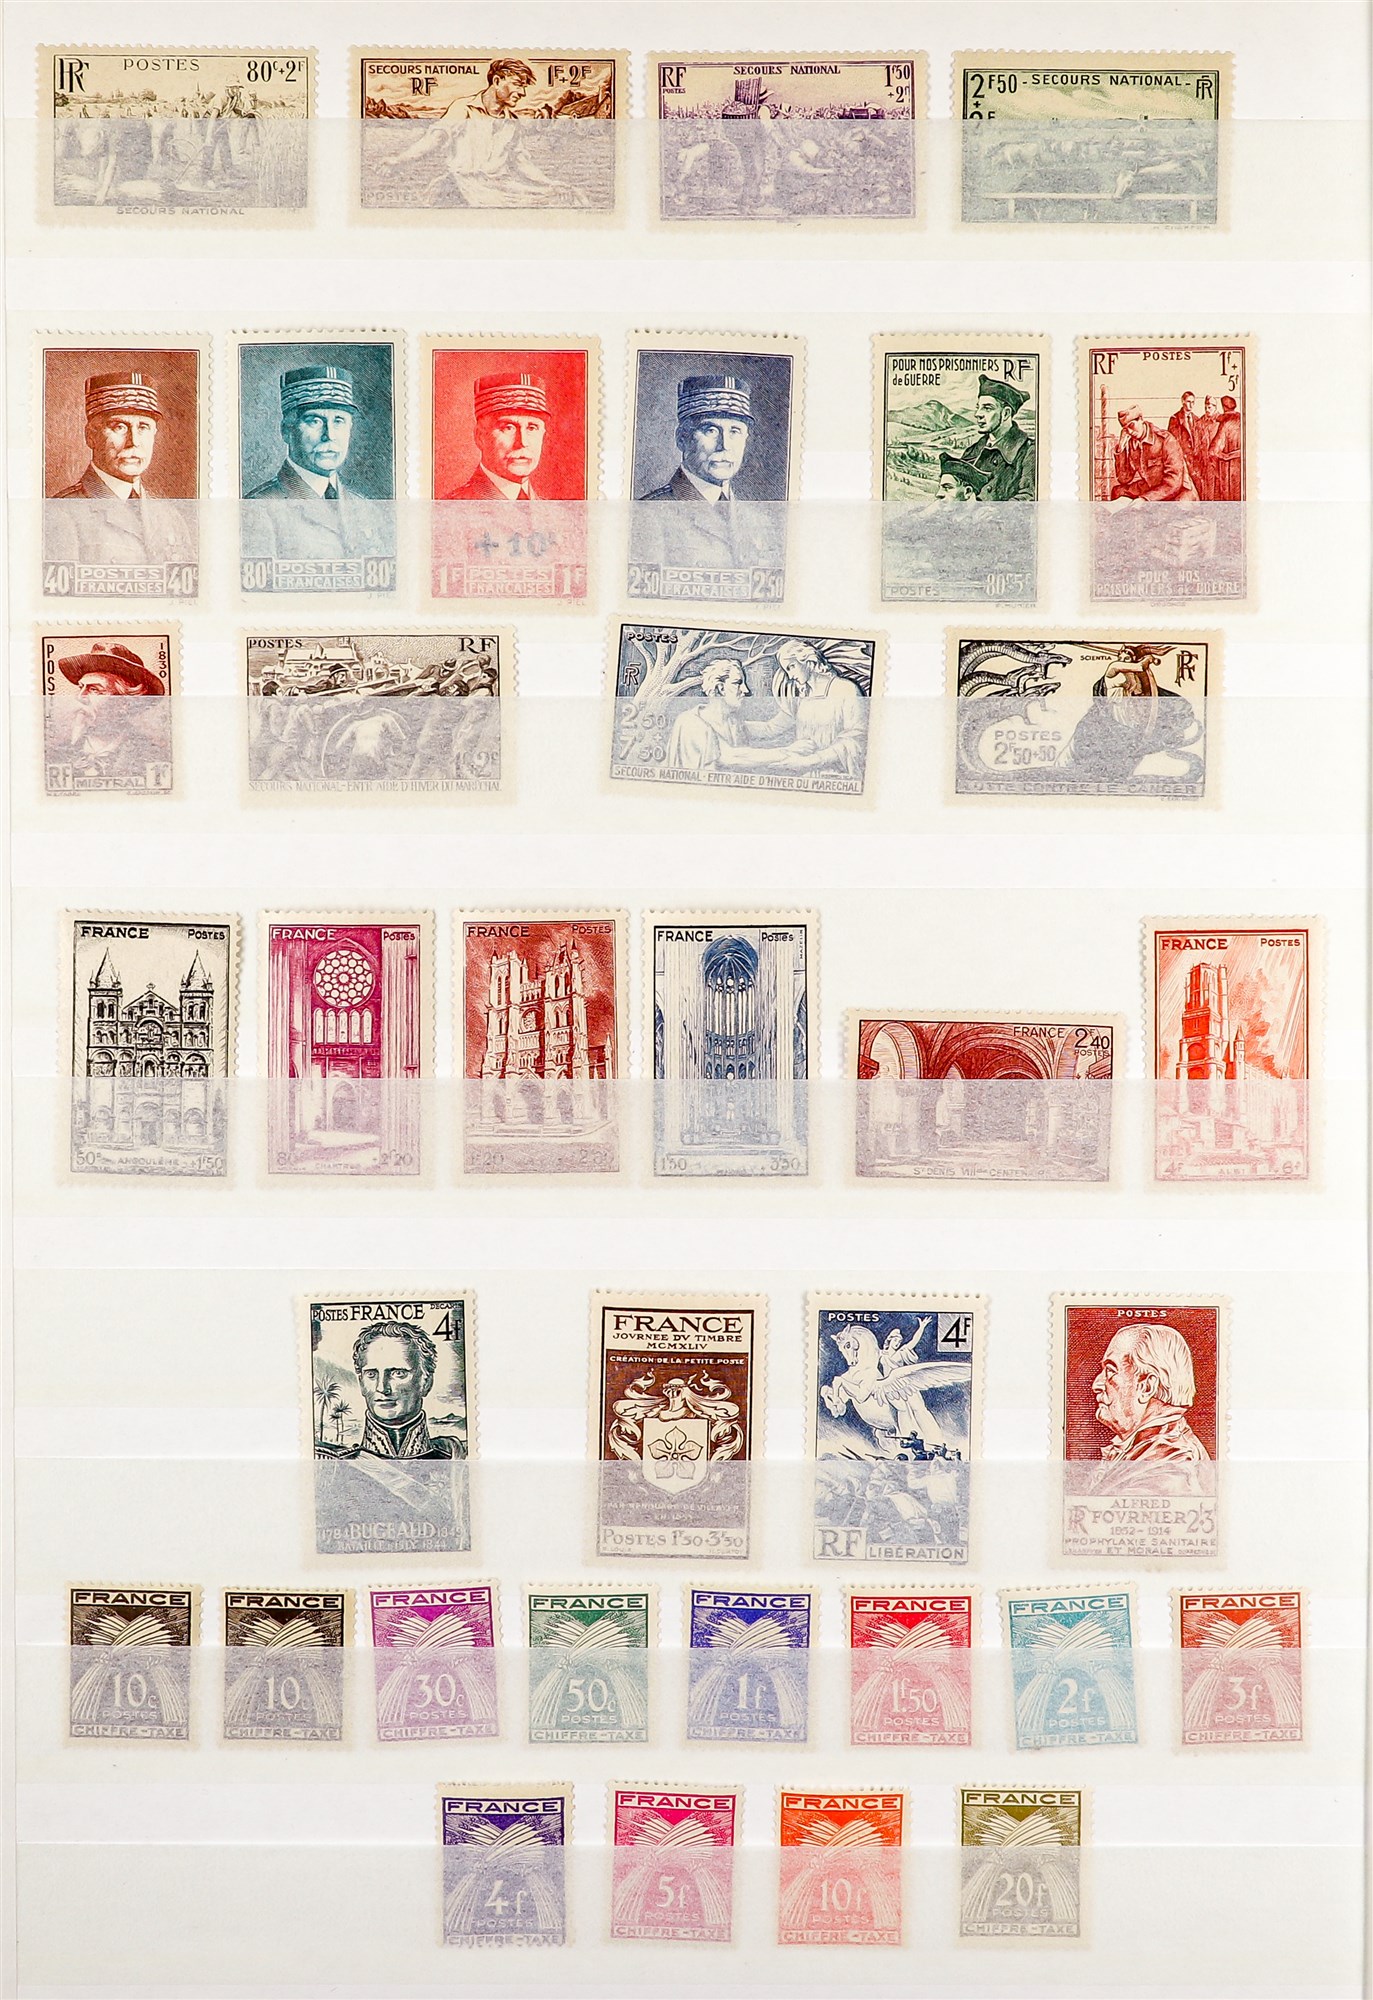 FRANCE 1930 - 1946 NEVER HINGED MINT COLLECTION on protective pages, sets, Red Cross issues, Postage - Image 4 of 4